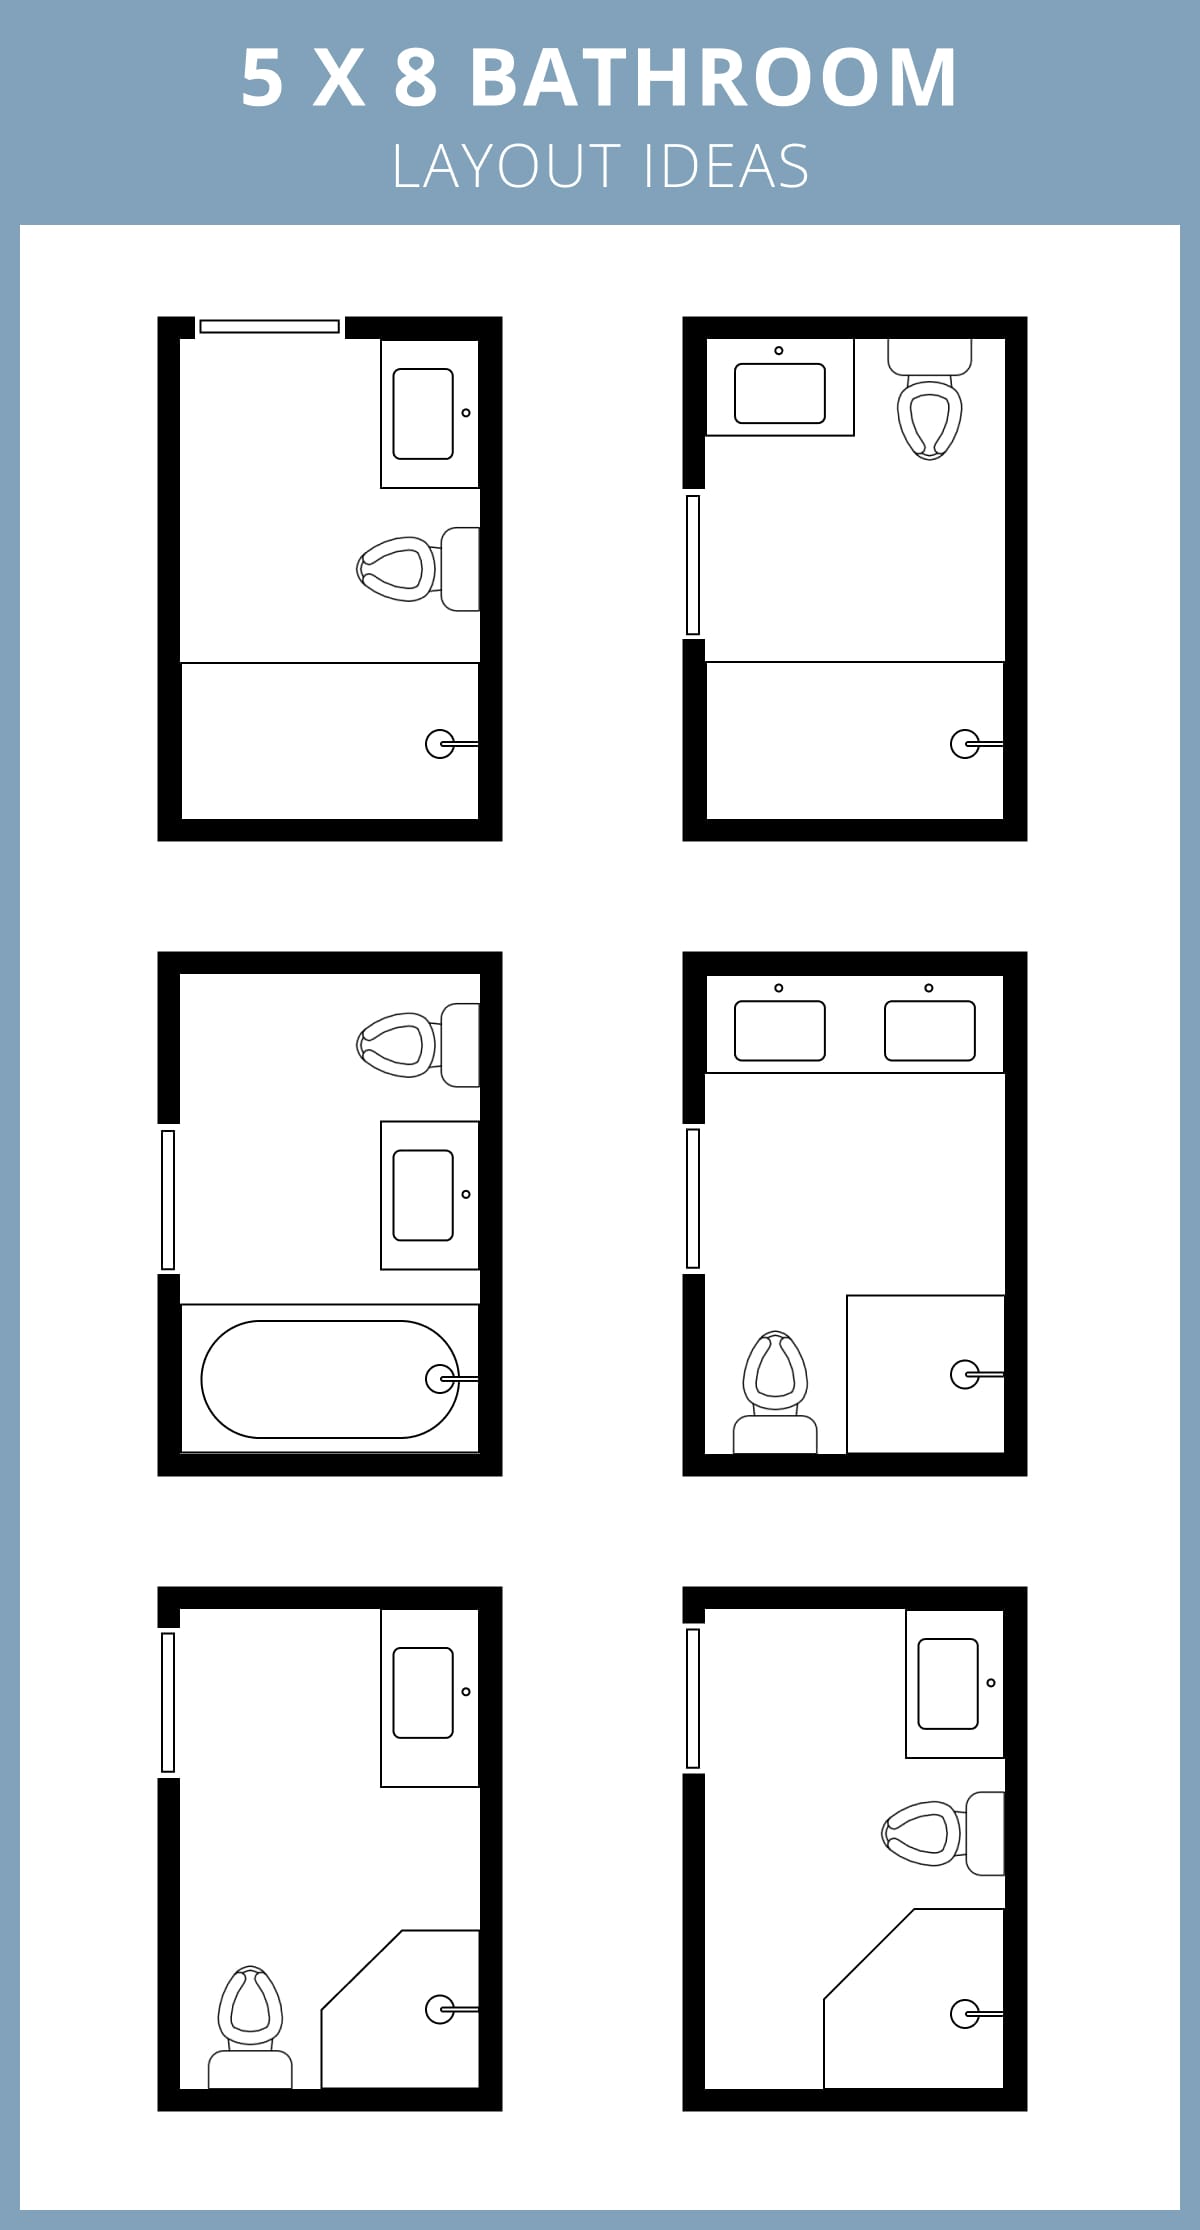 5x8 bathroom layout ideas to maximize a small space. 5 ft by 8 ft bath floorplan.